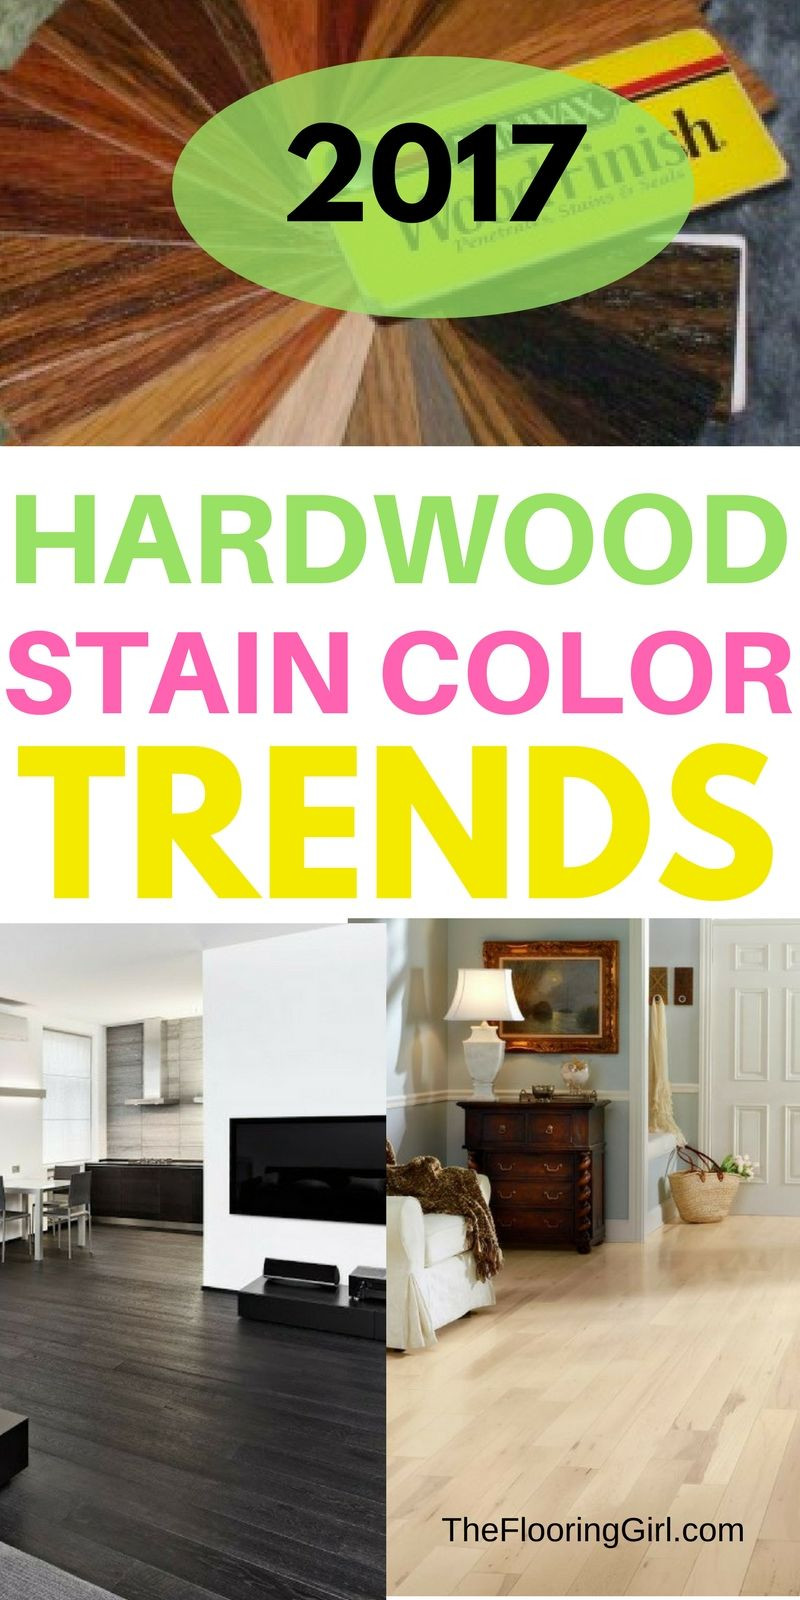 15 Perfect Hardwood Flooring Estimate Online 2024 free download hardwood flooring estimate online of hardwood flooring stain color trends 2018 more from the flooring with regard to hardwood flooring stain color trends for 2017 hardwood colors that are in